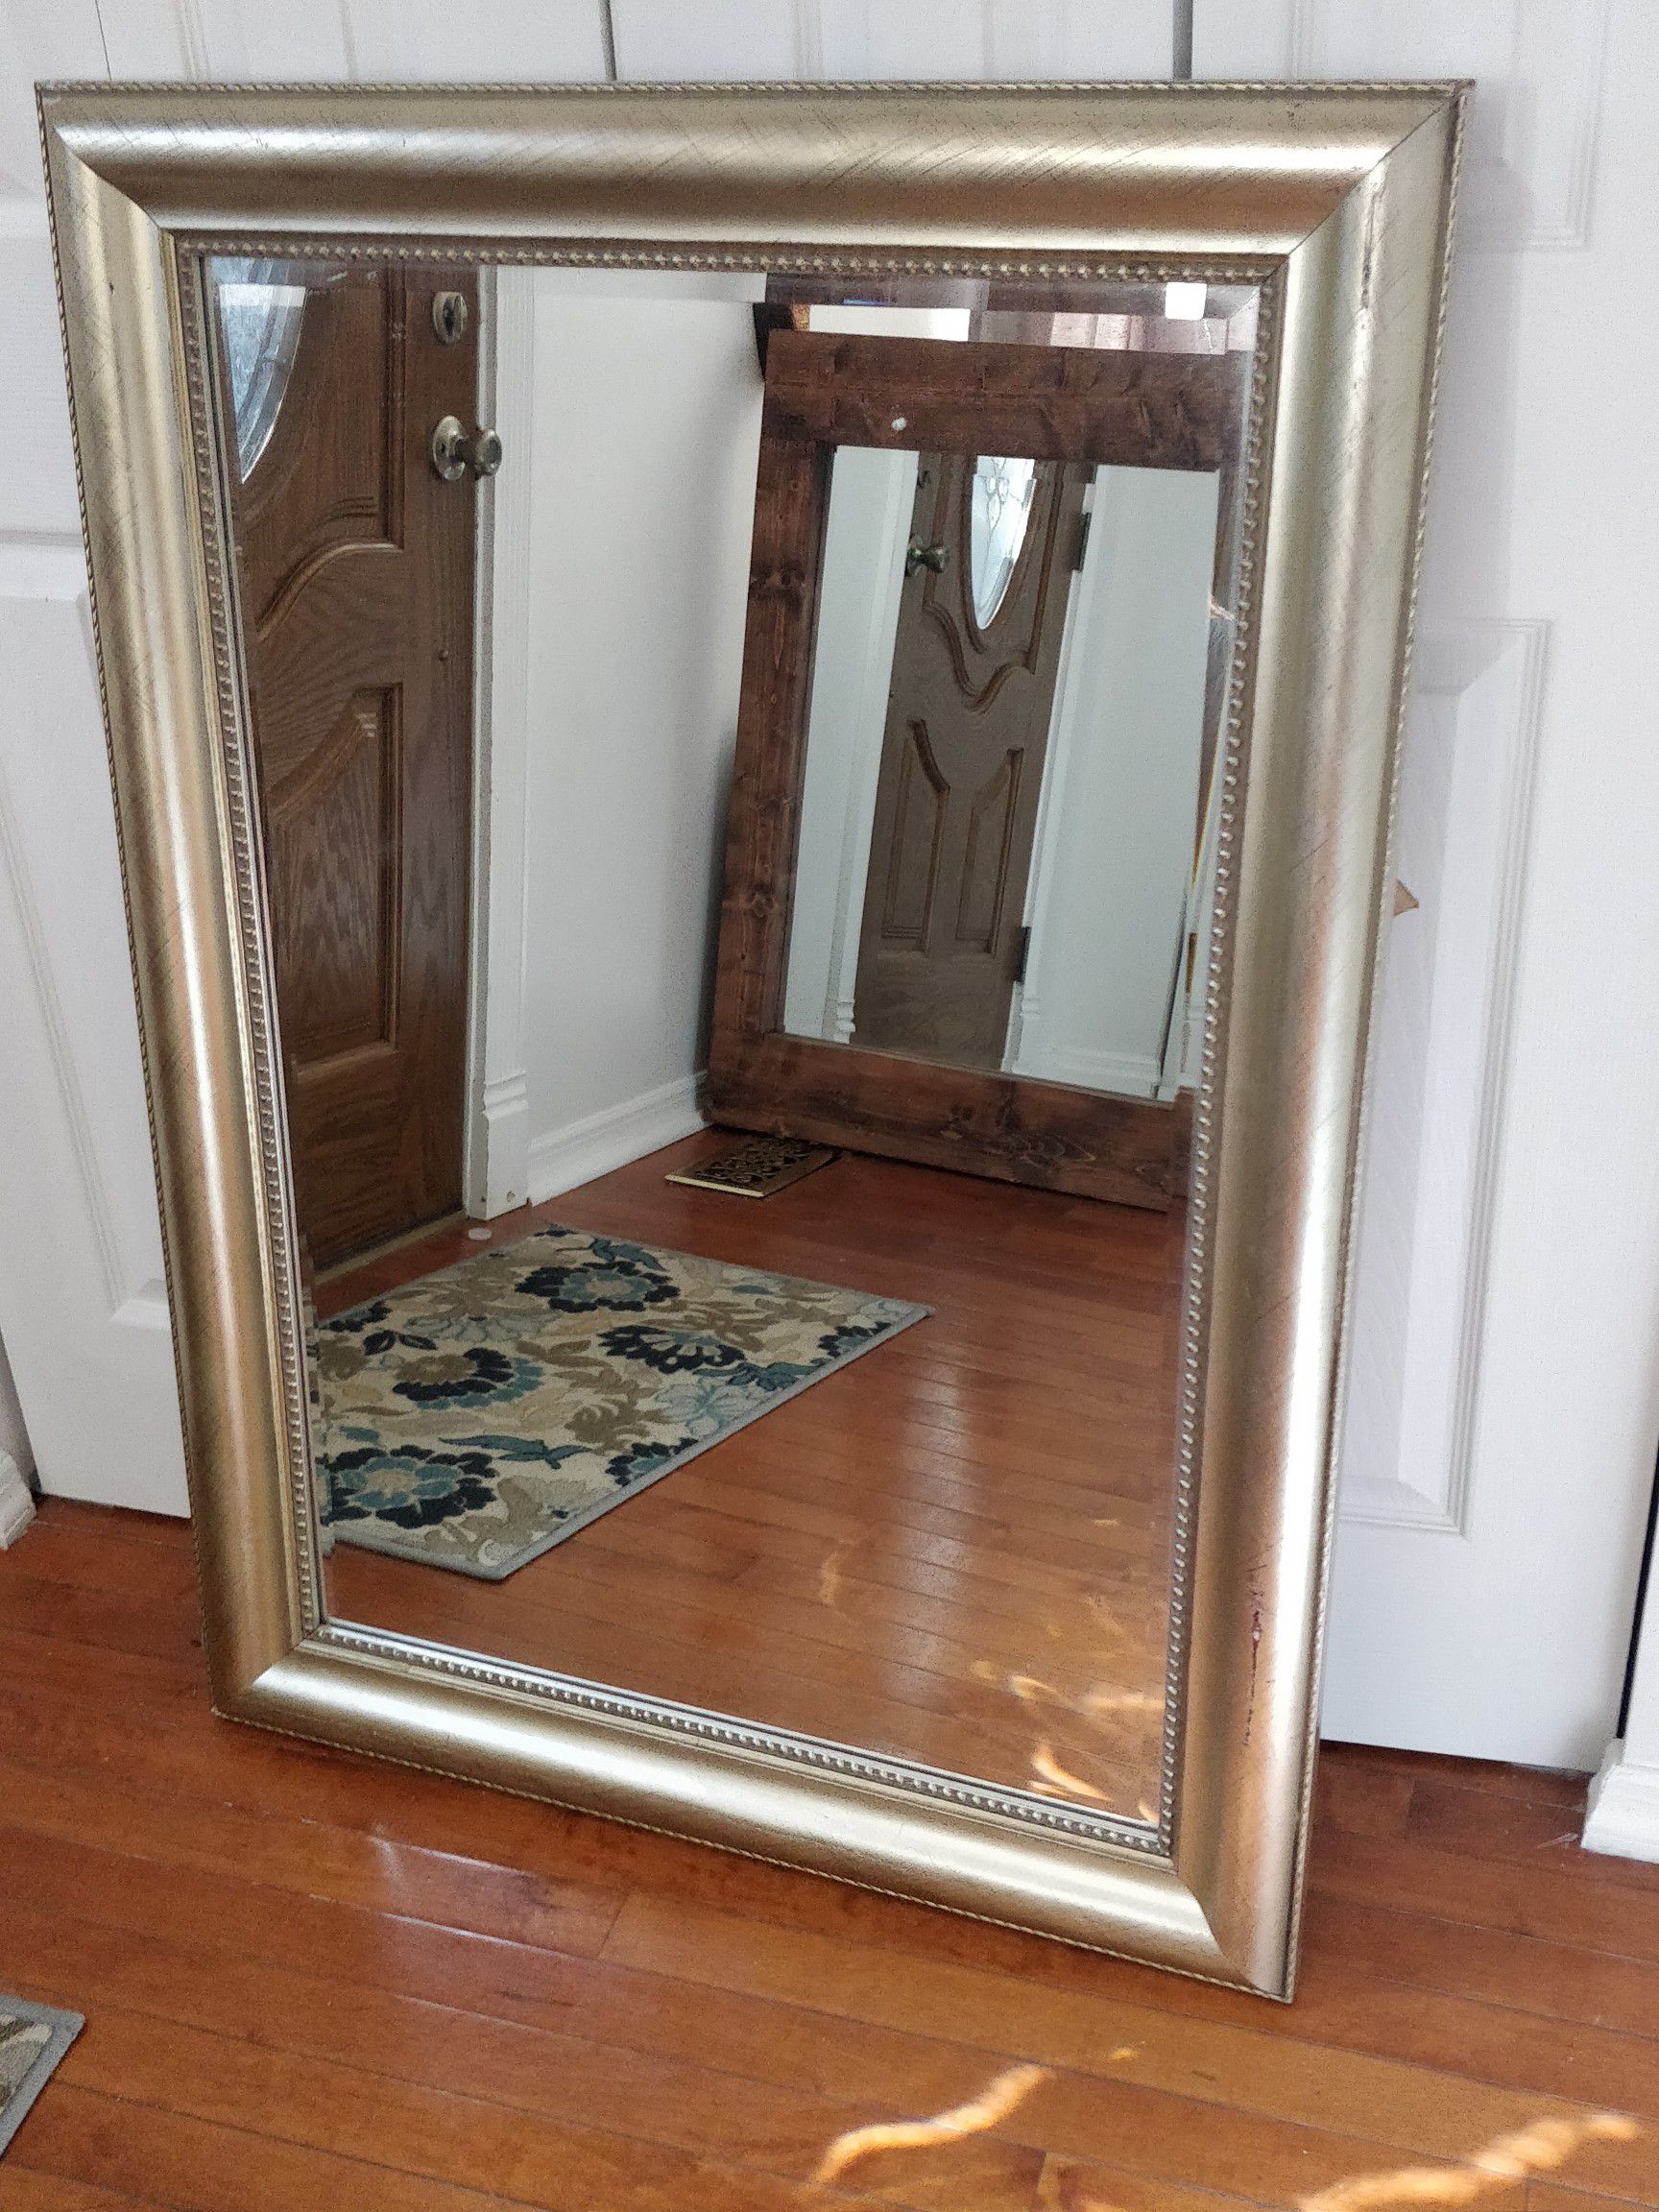 Nice wooden frame mirror # in good condition, L42.5"*H30.5"